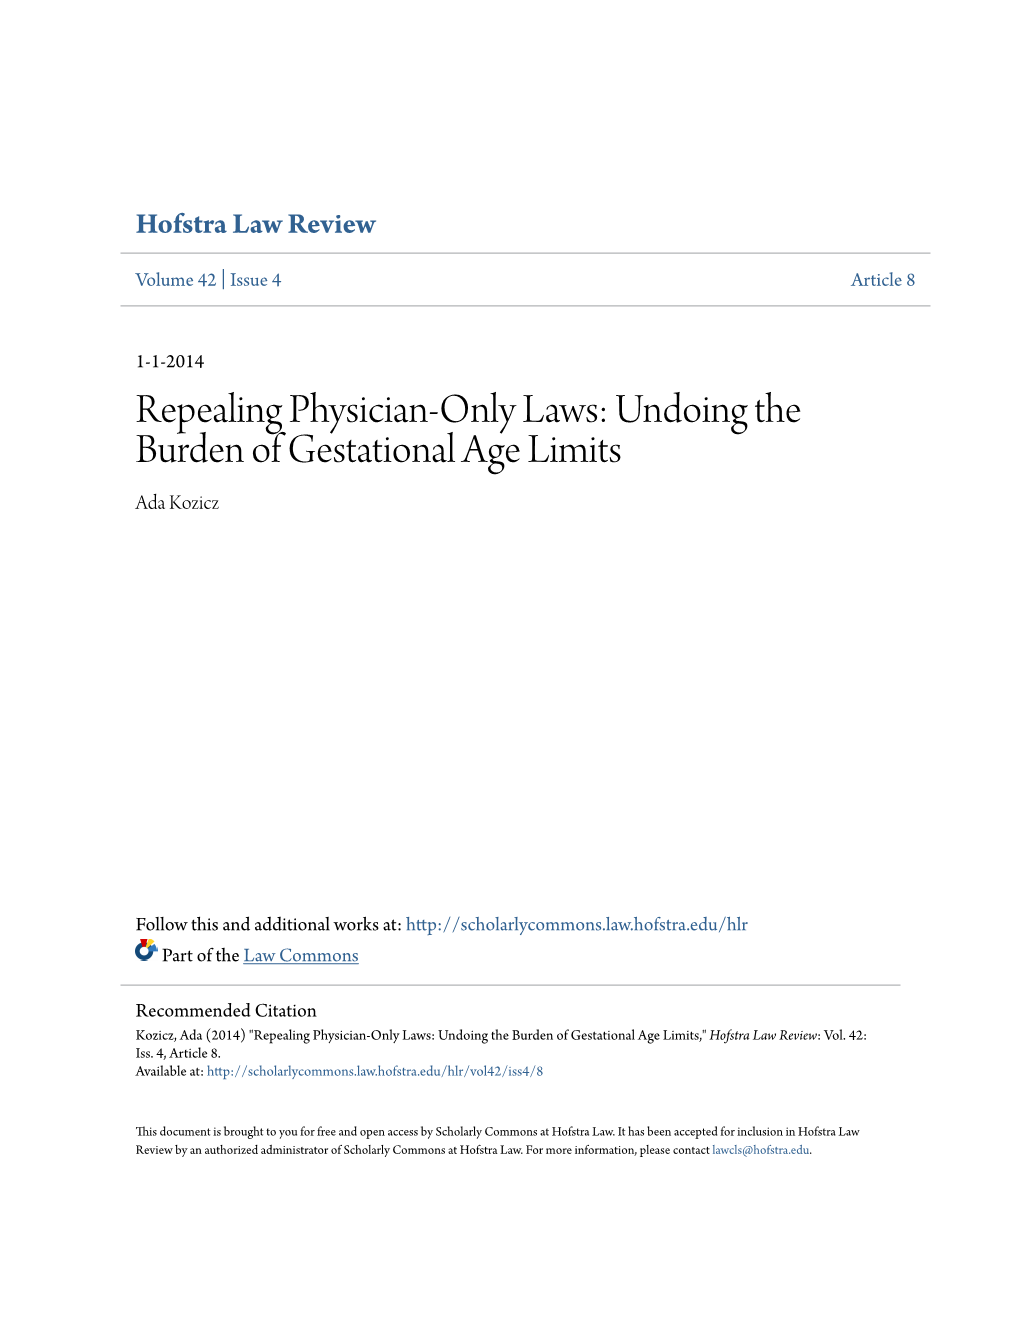 Repealing Physician-Only Laws: Undoing the Burden of Gestational Age Limits Ada Kozicz